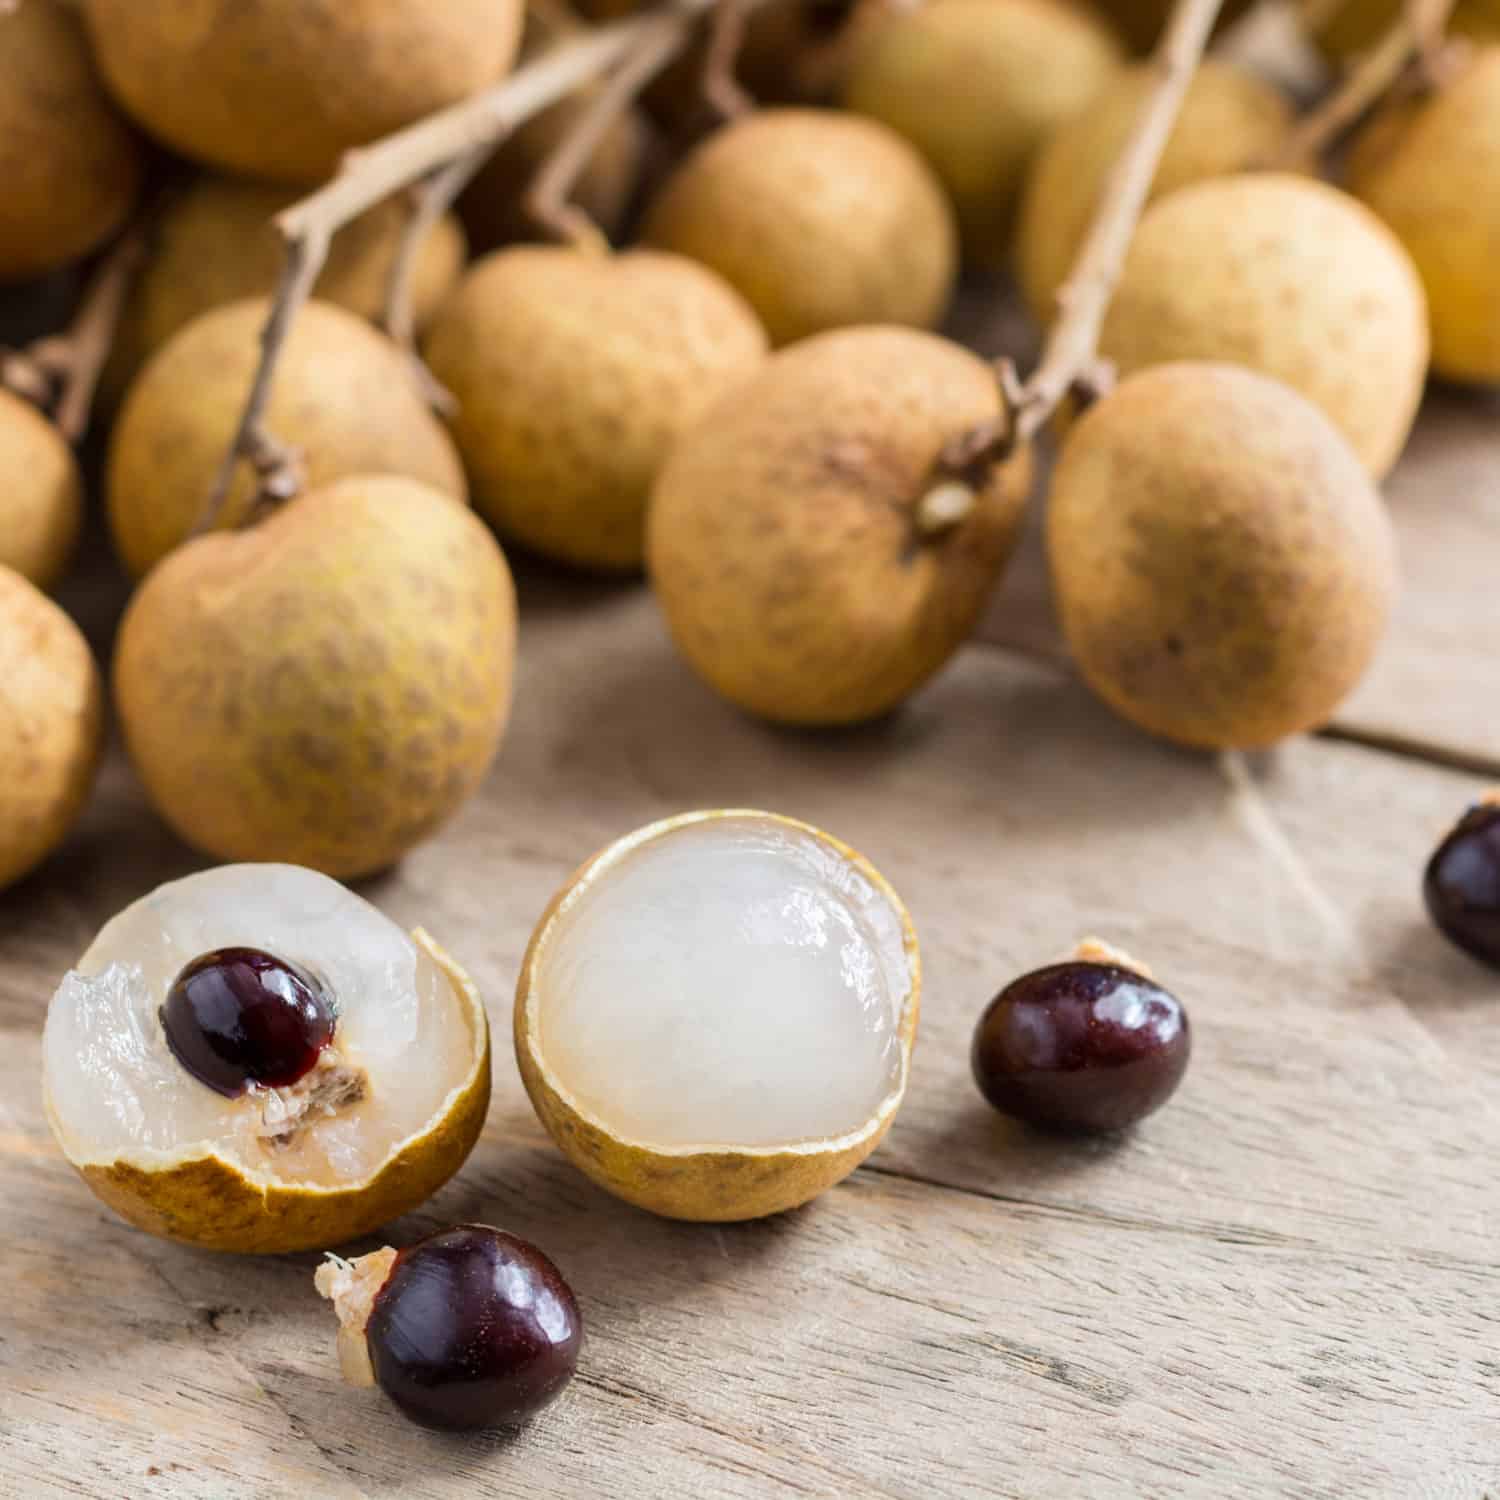 Longan Fruit Nutrition Facts, Health Benefits and Uses - Dr. Axe